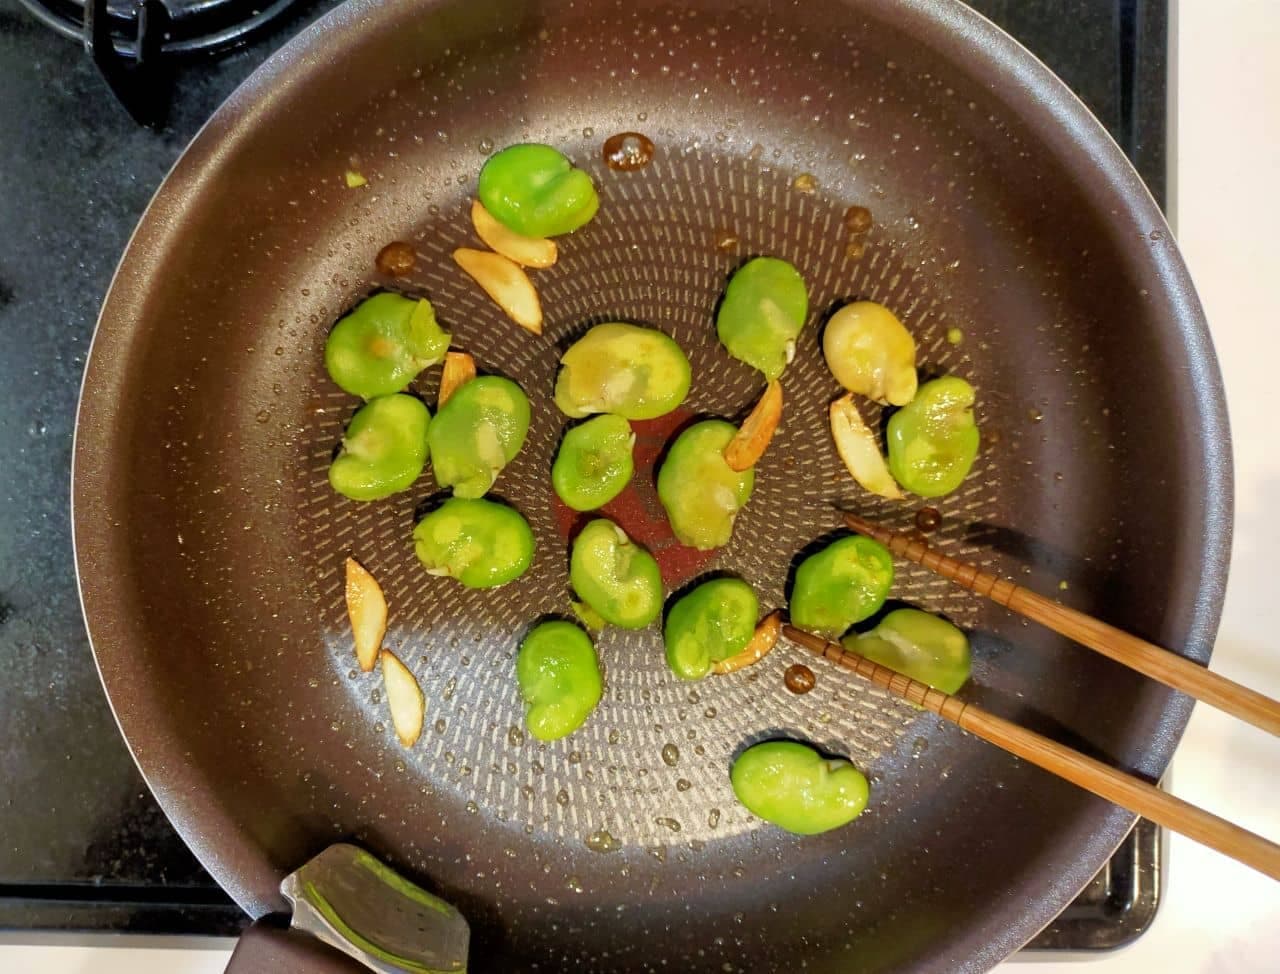 Recipe for "stir-fried broad beans and garlic in soy sauce"